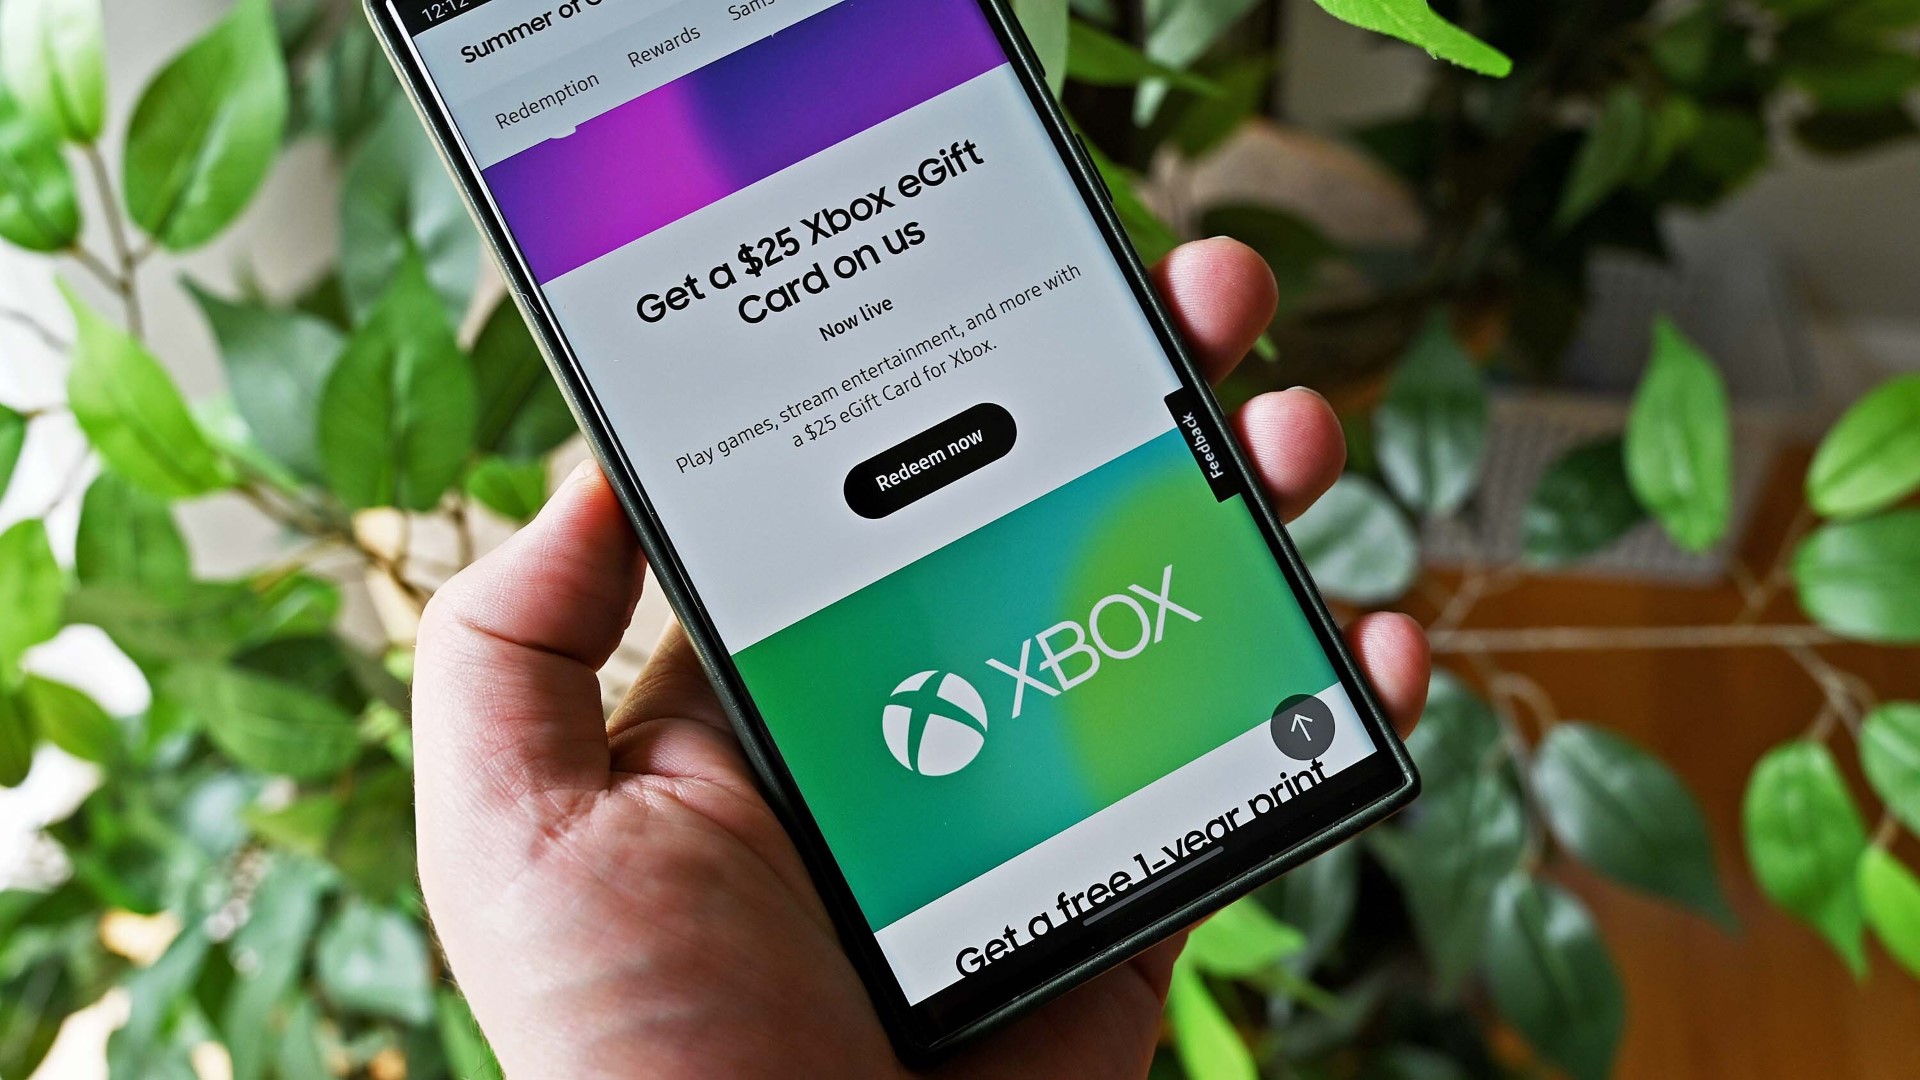 About Xbox Gift Card: Uses, Redemption, Balance & More - Nosh